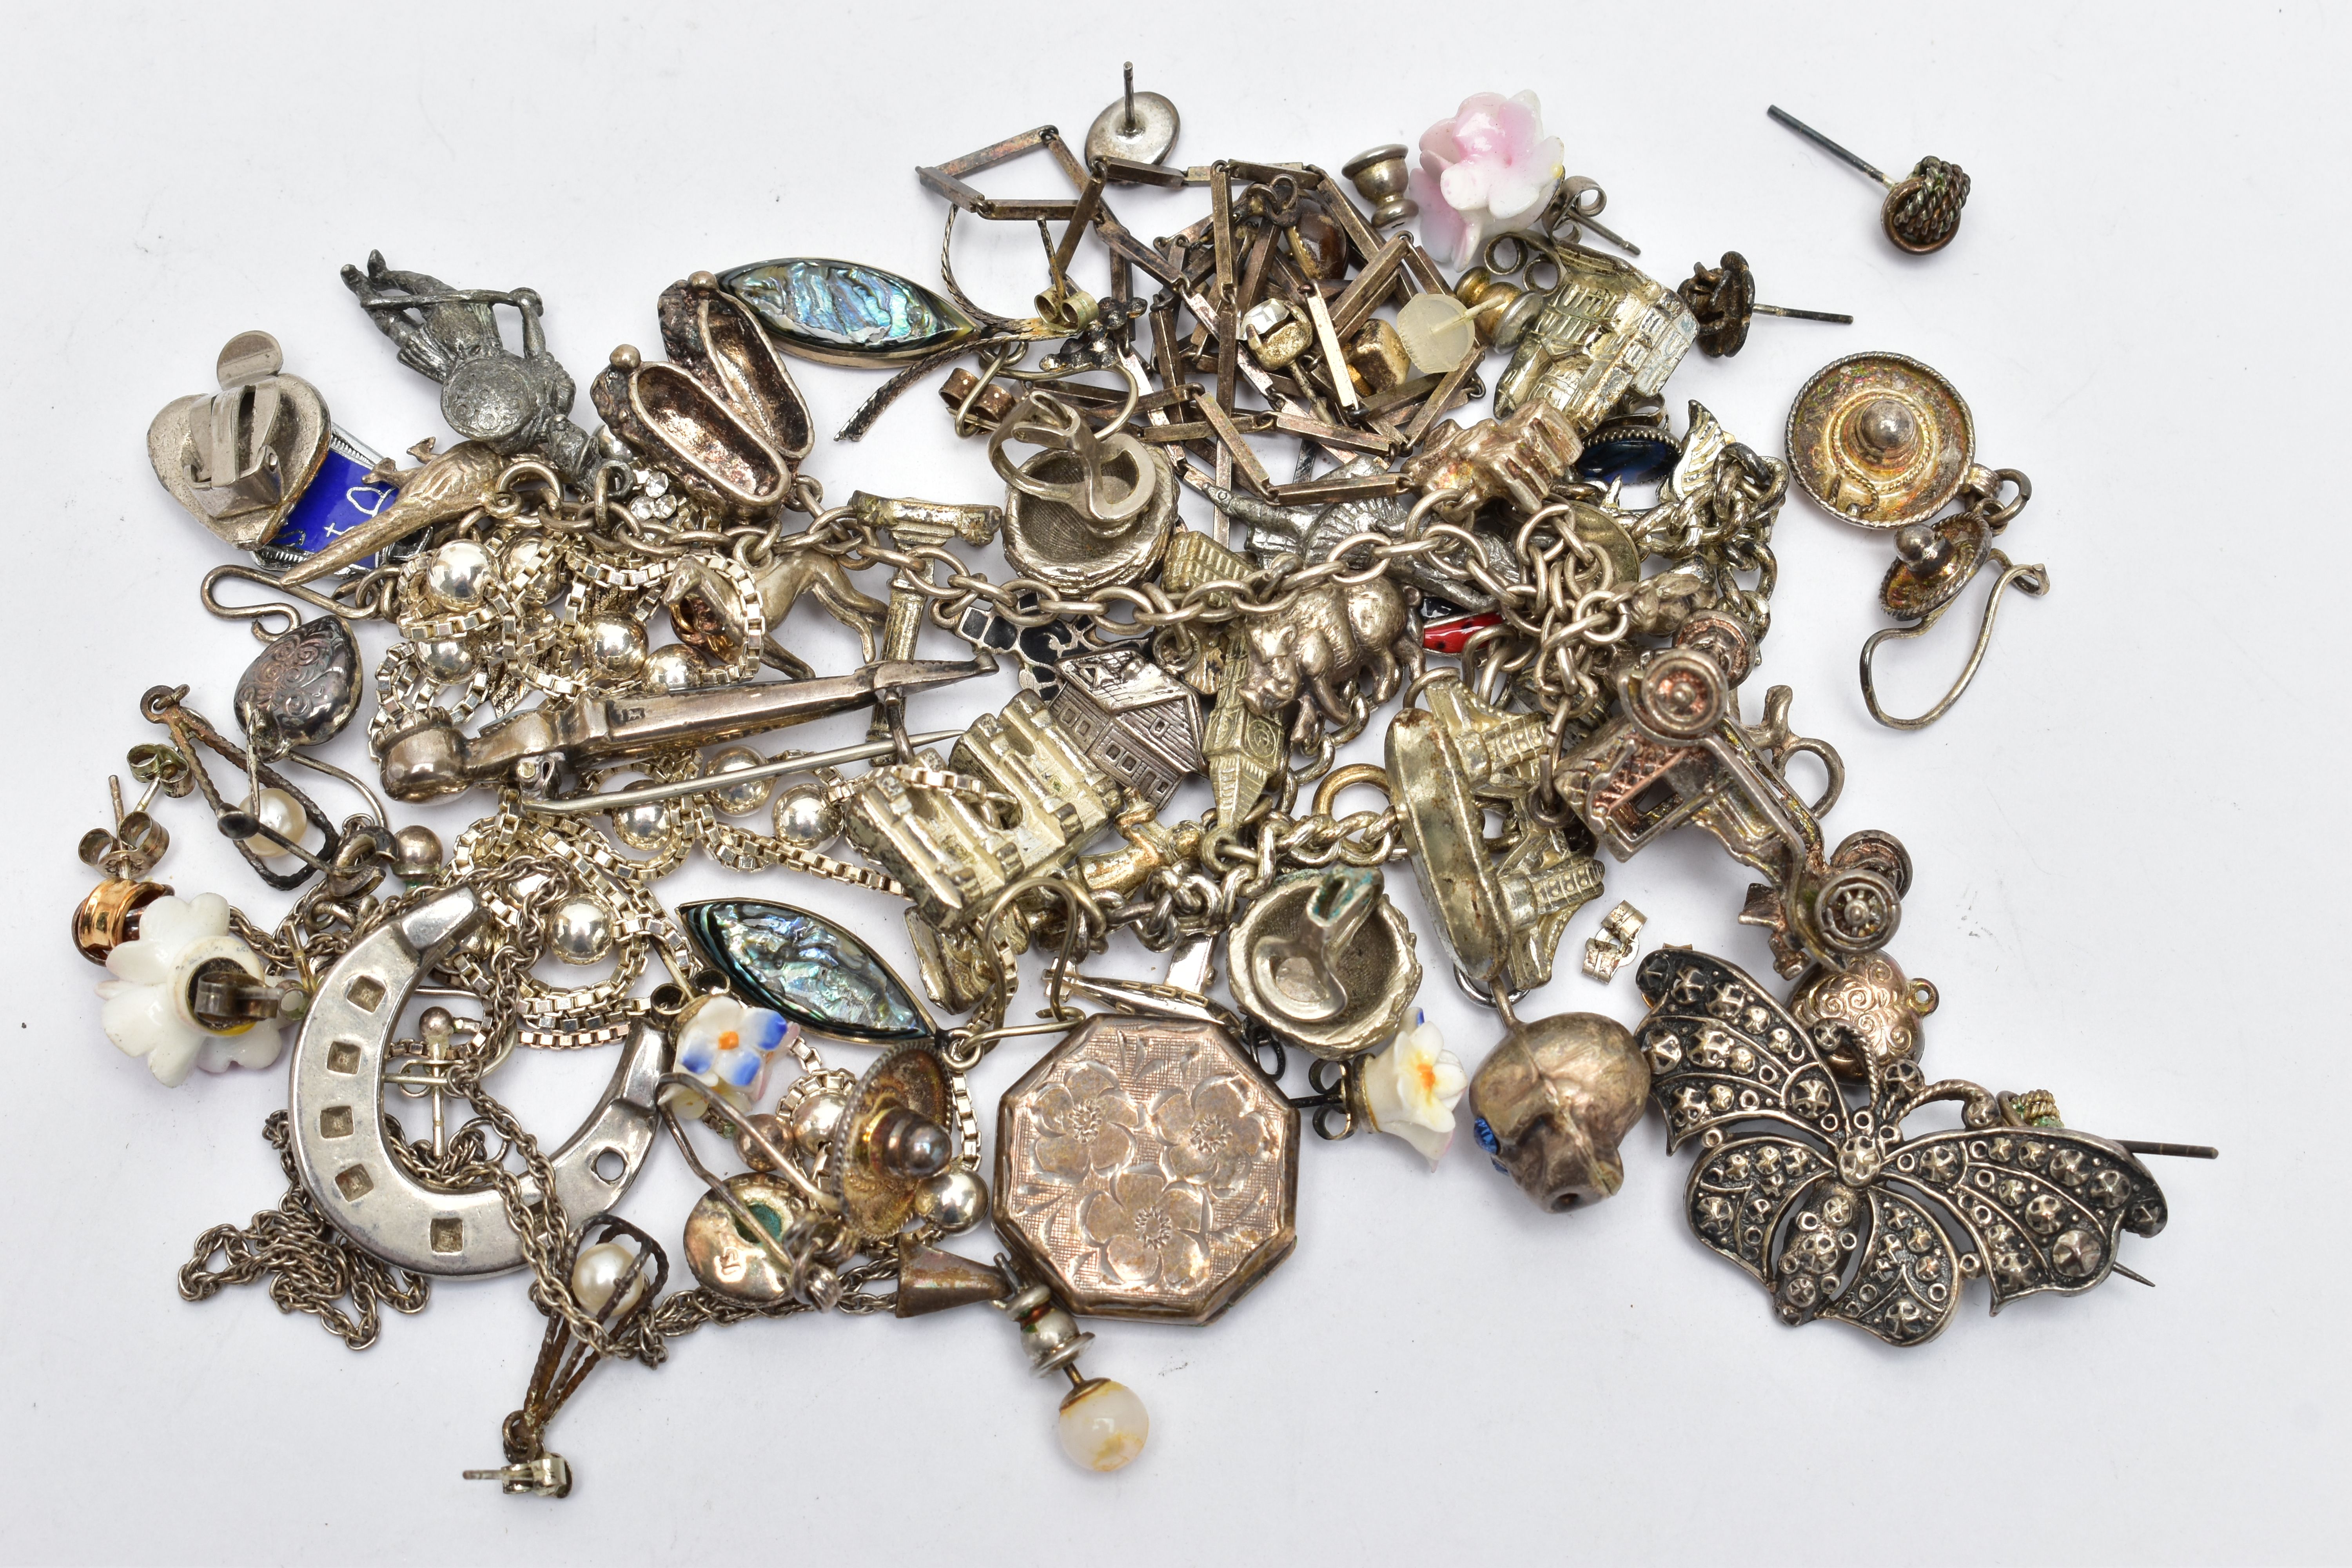 AN ASSORTMENT OF WHITE METAL JEWELLERY, to include a Scottish brooch, chain necklaces, two charm